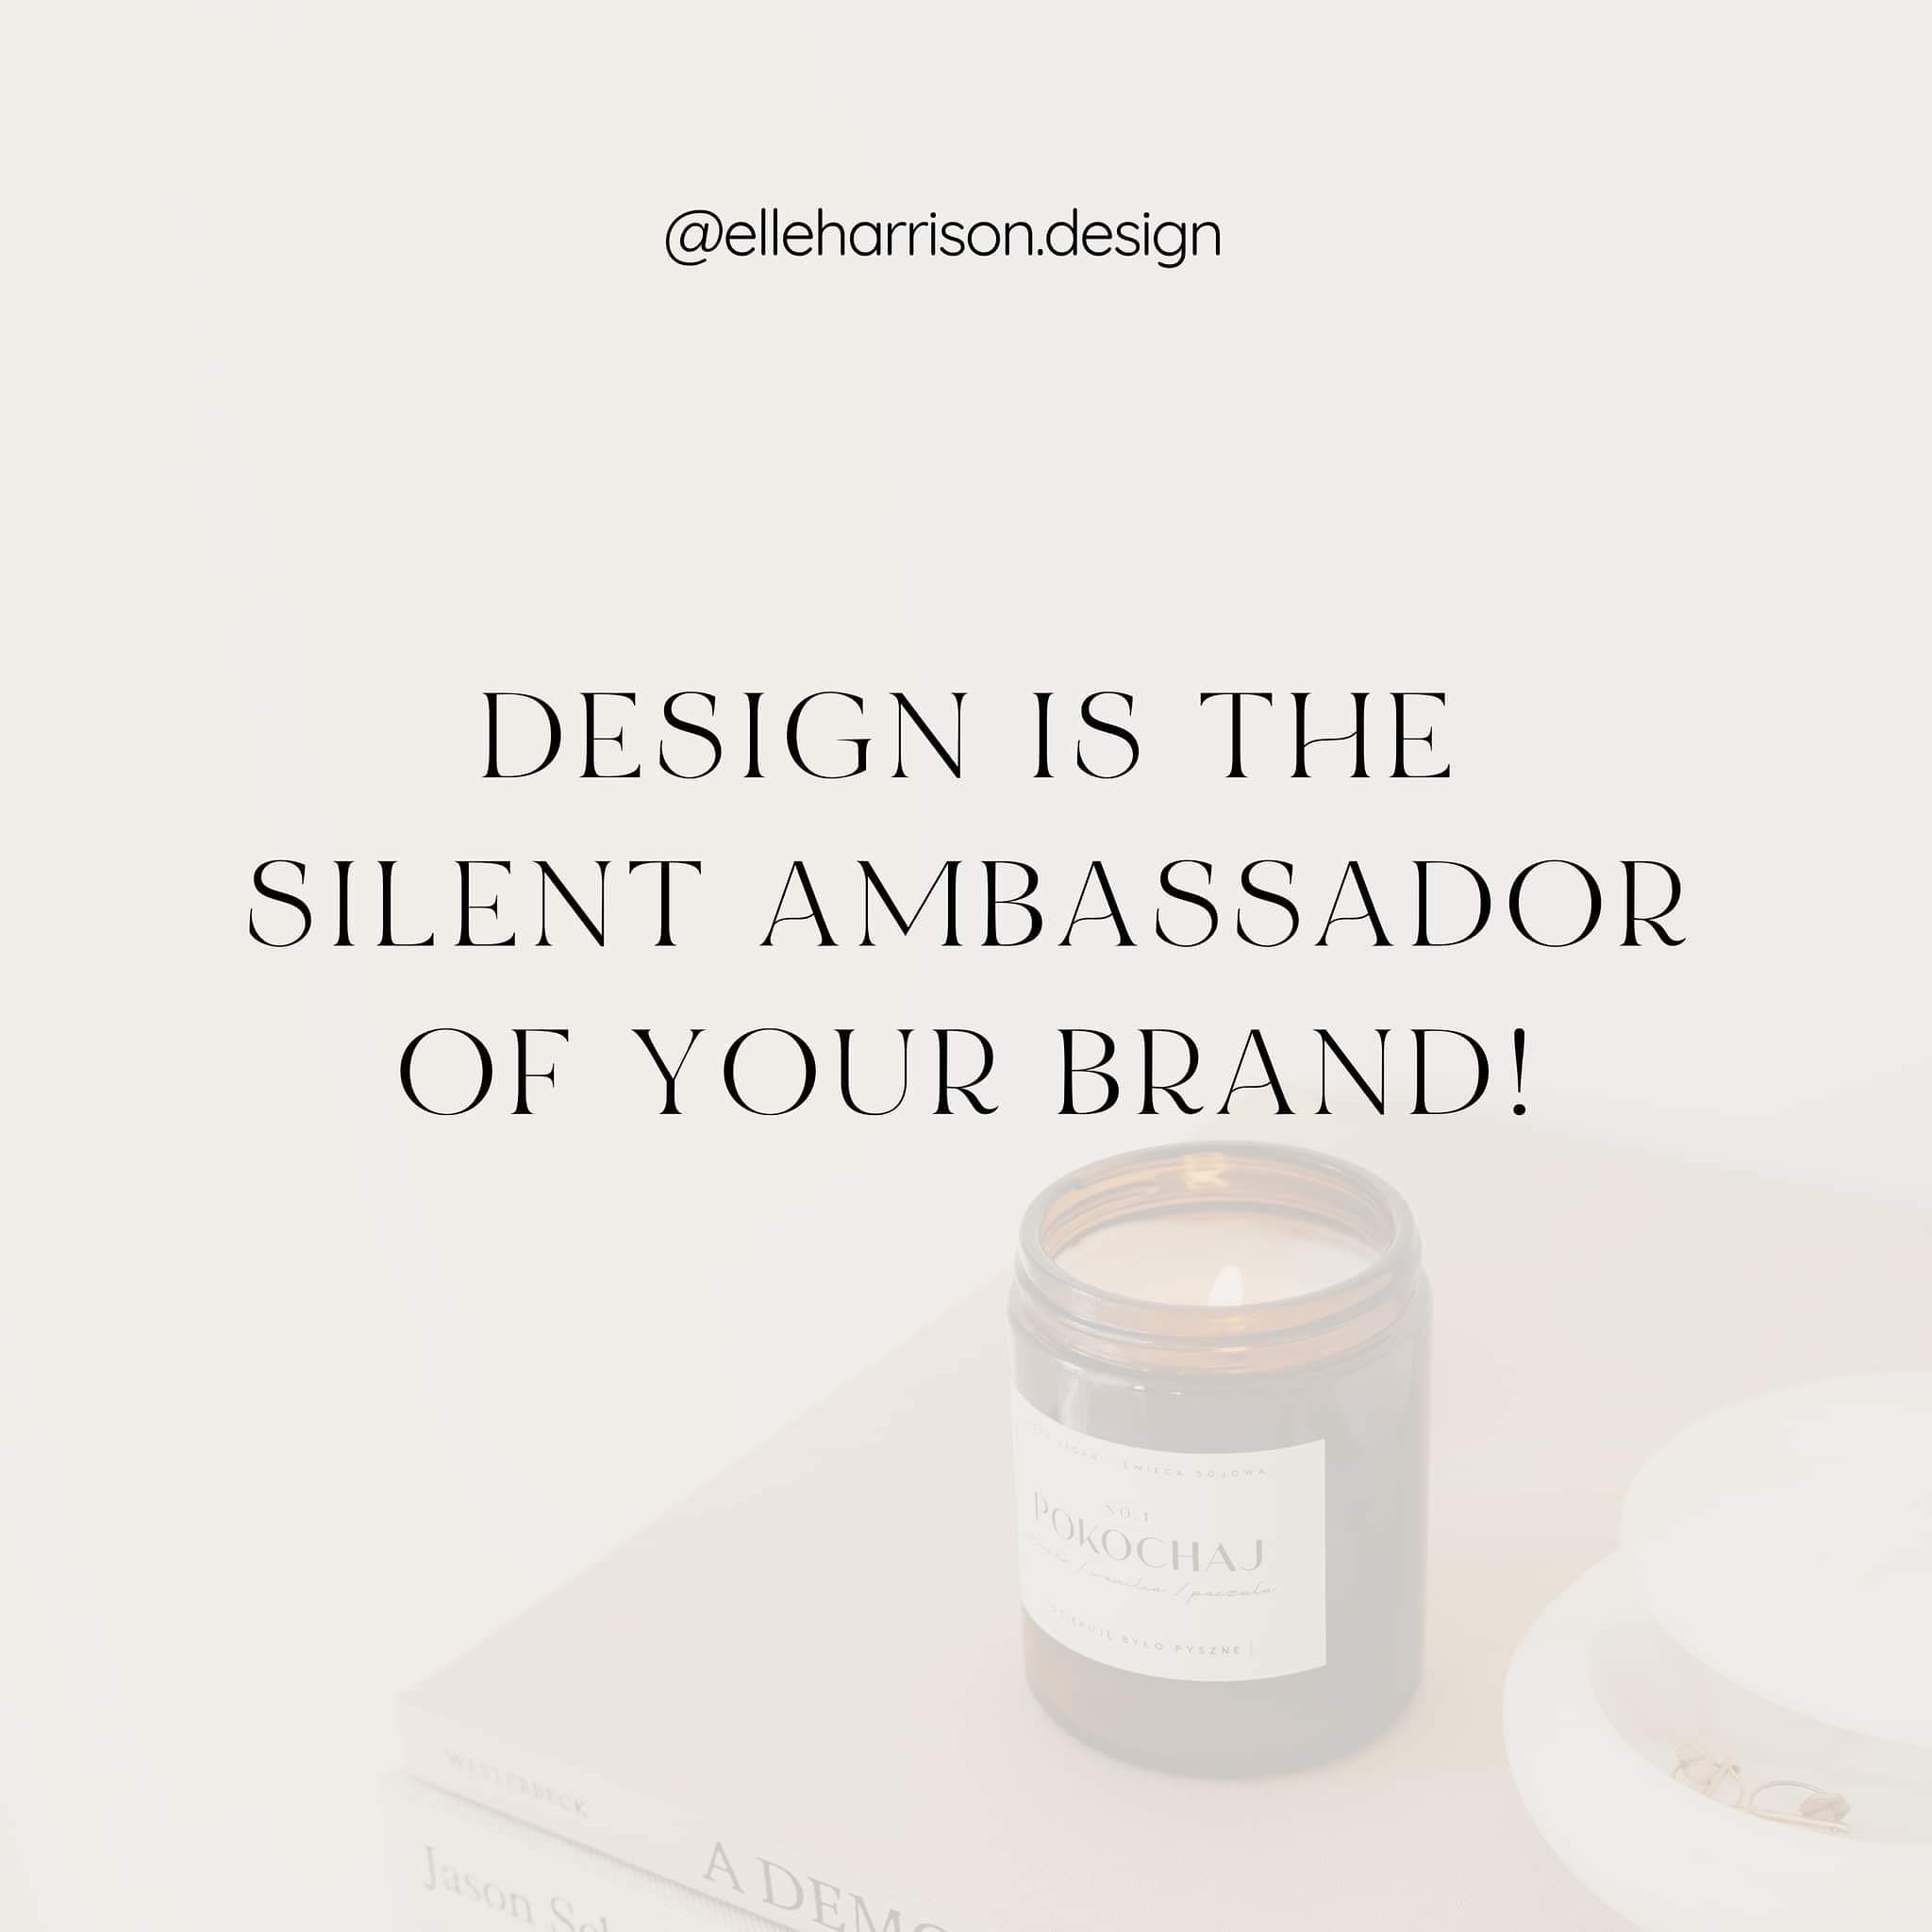 Reminder: Your design is the silent ambassador of your brand!